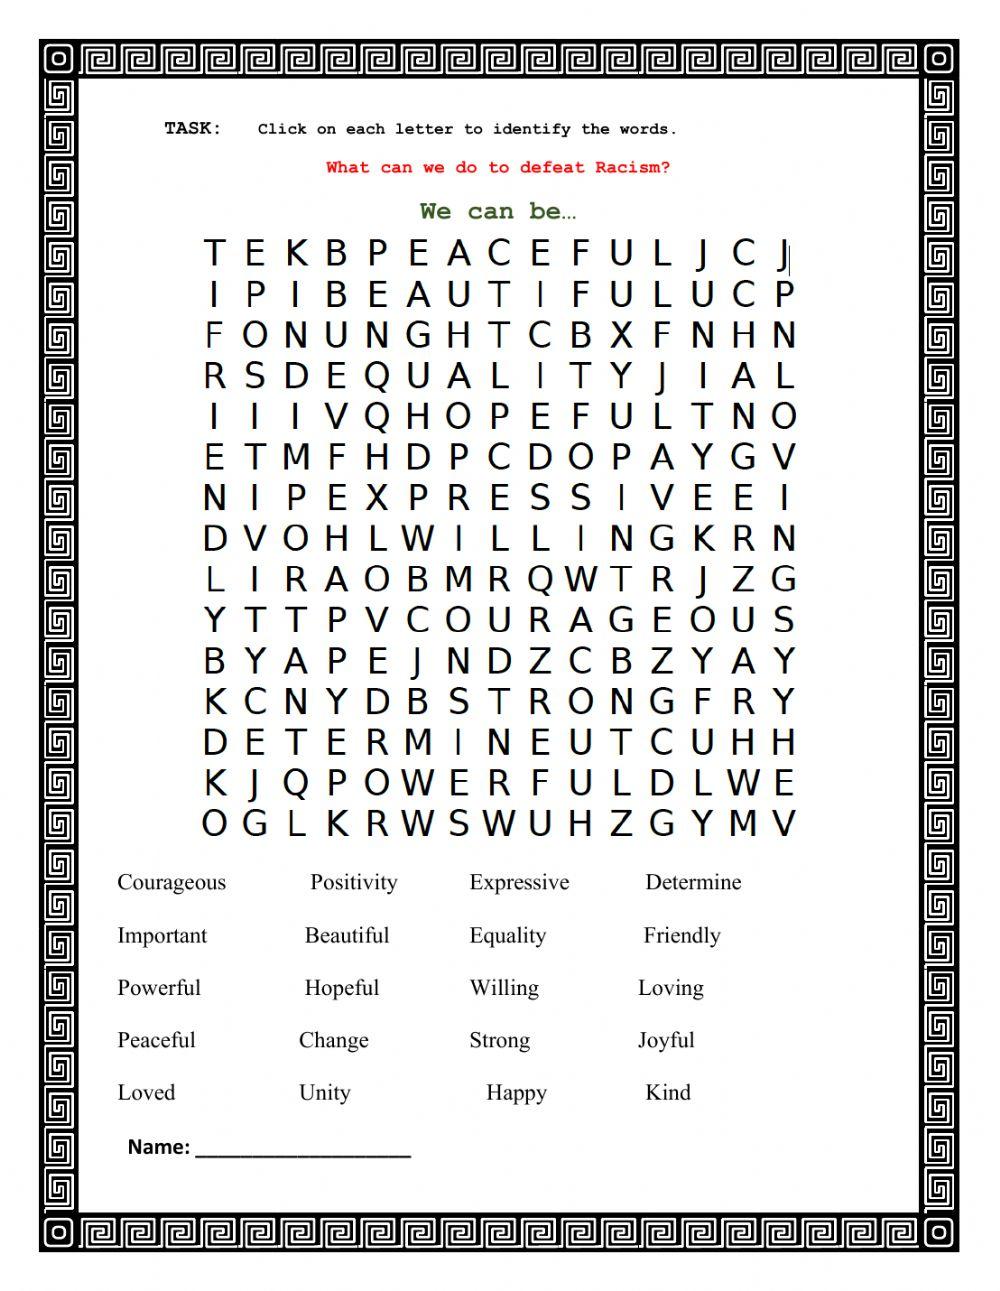 Racism: Wordsearch